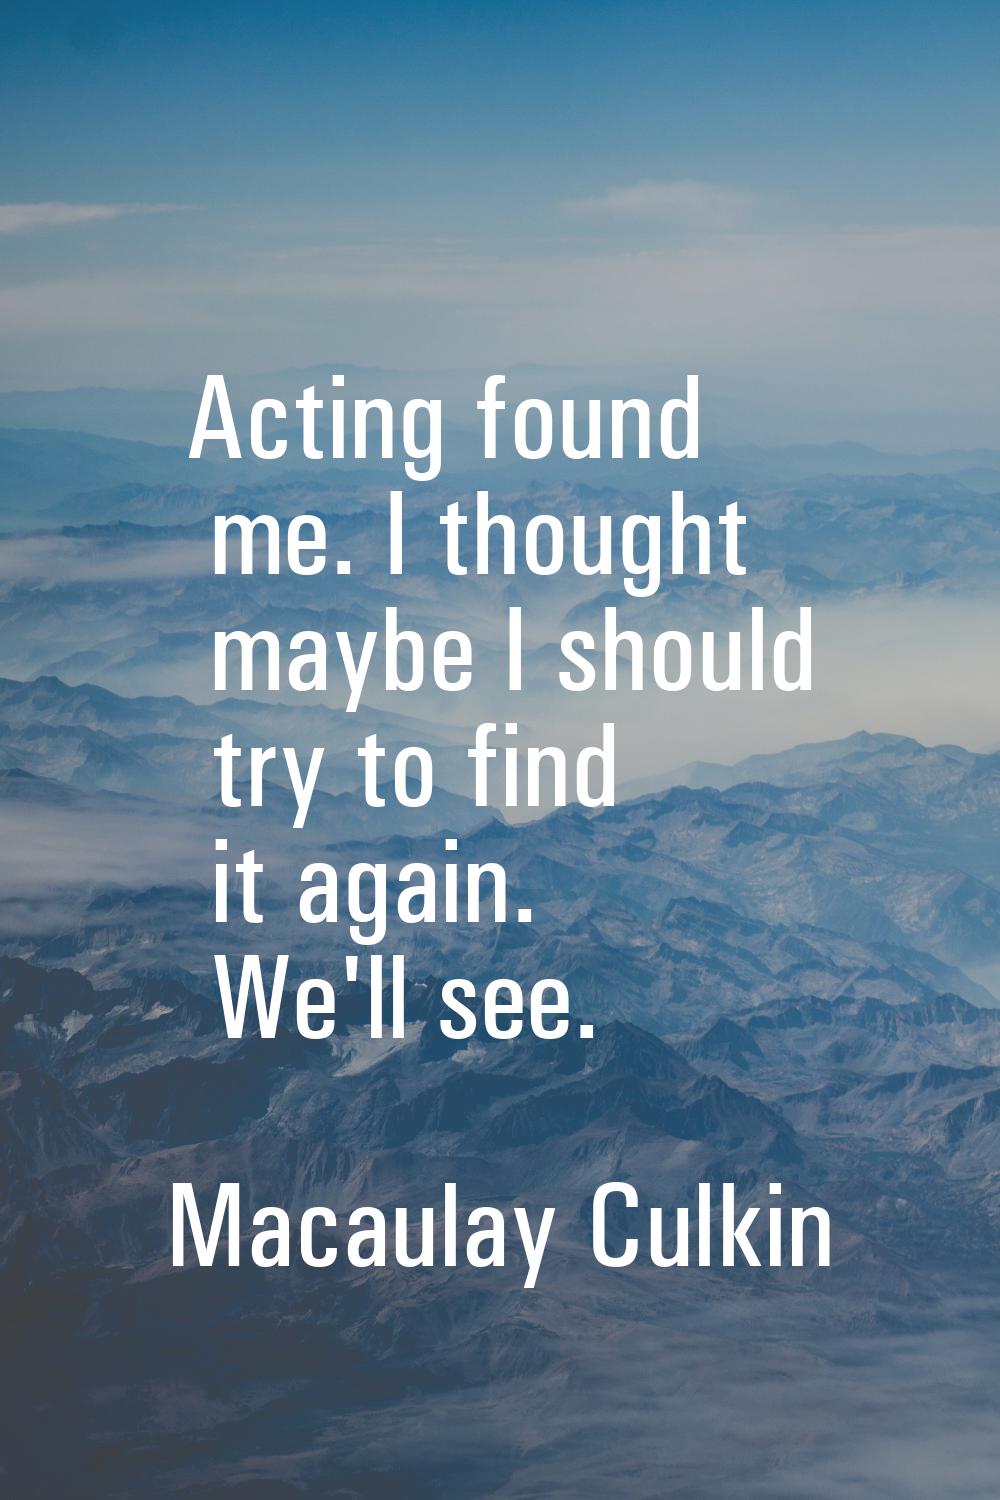 Acting found me. I thought maybe I should try to find it again. We'll see.